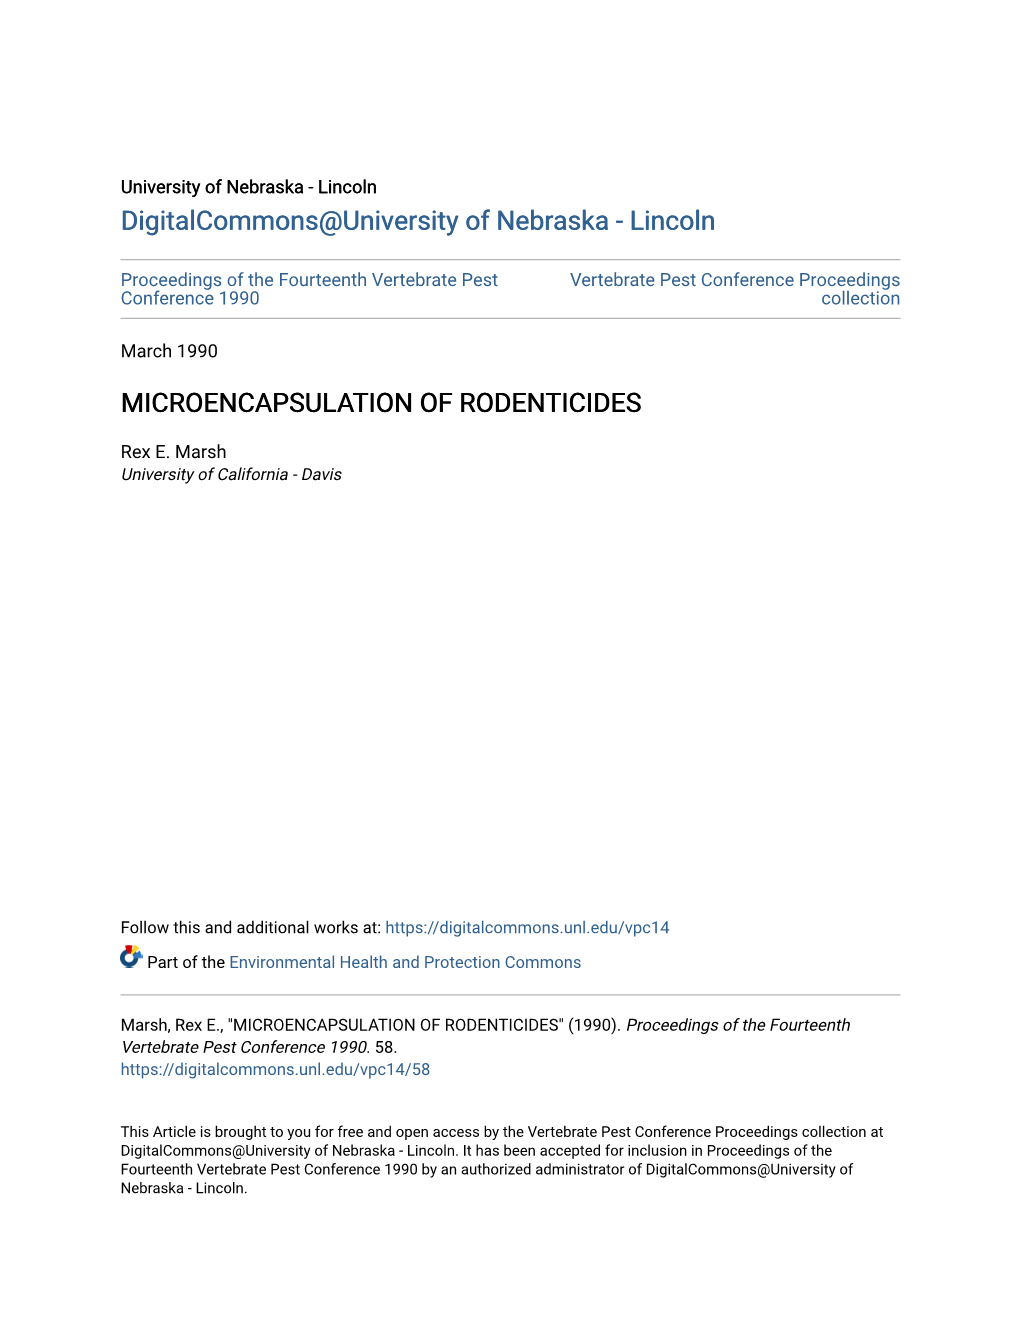 Microencapsulation of Rodenticides